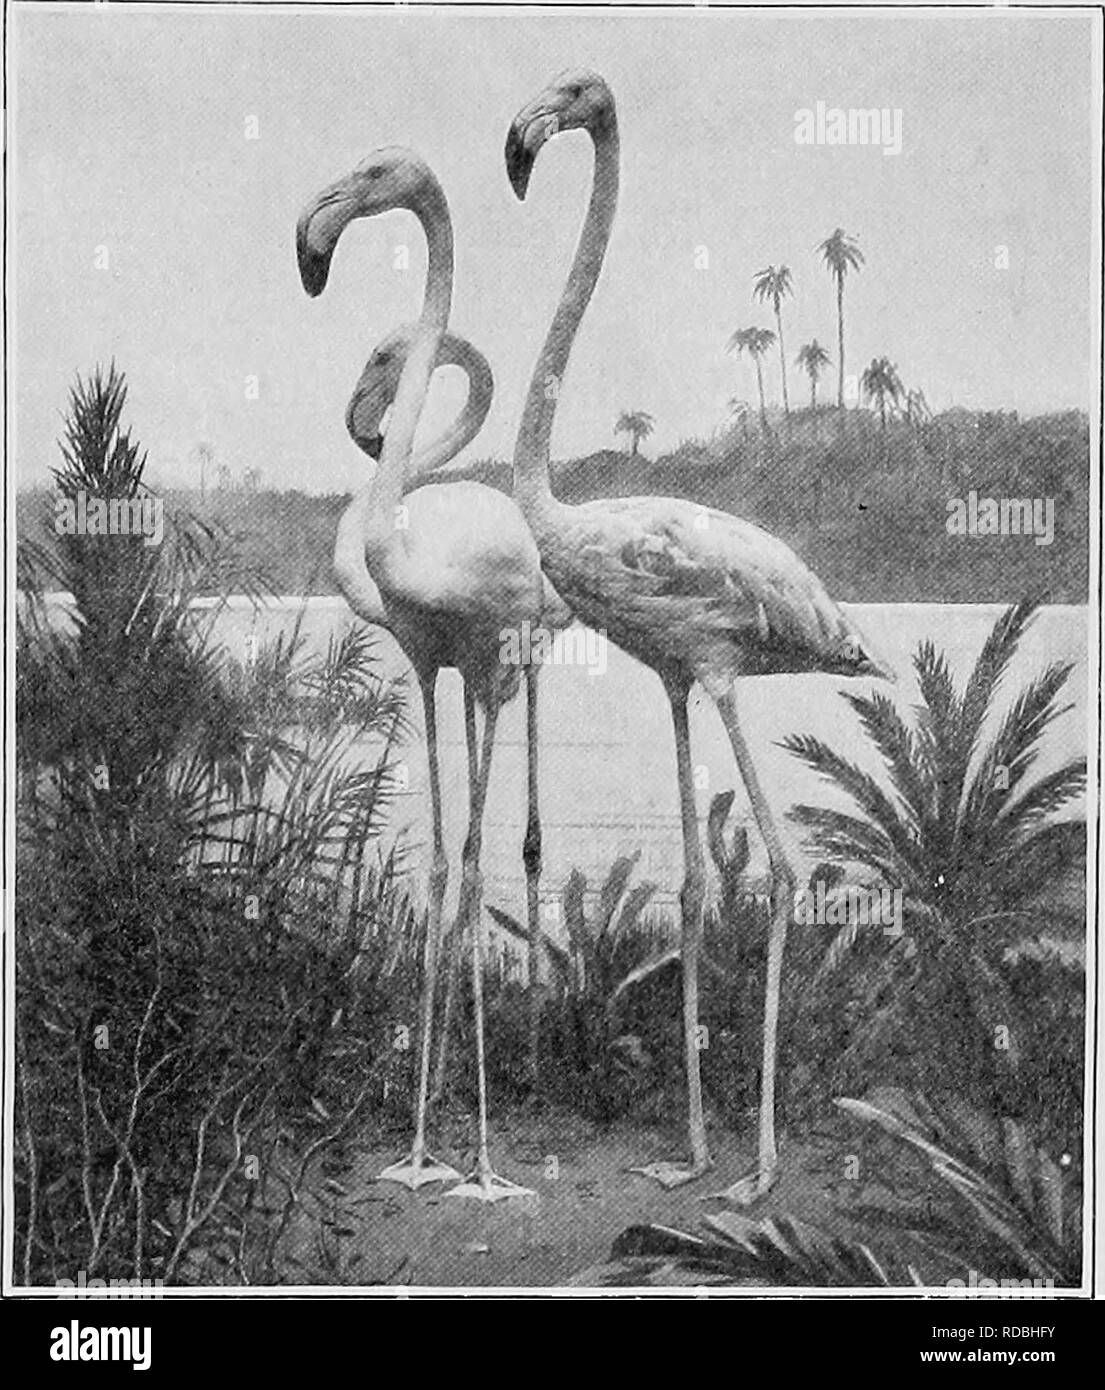 . The American natural history; a foundation of useful knowledge of the higher animals of North America. Natural history. THE TRADE IN FLAMINGOES 165 tervals they still do so. Captain W. D. Collier, Marco Island, west coast of Florida, states that when he first made his home on that island, forty years ago, &quot;Flamingoes came there every year by the thousand!&quot; Besides those on Andros. N. Y. Zoological Park. THE FLAMINGO. Island in the Bahamas, Flamingoes are found in Cuba, and on the north coast of Yucatan. Until about 1906 every year from twenty to fifty live birds were brought to New Stock Photo